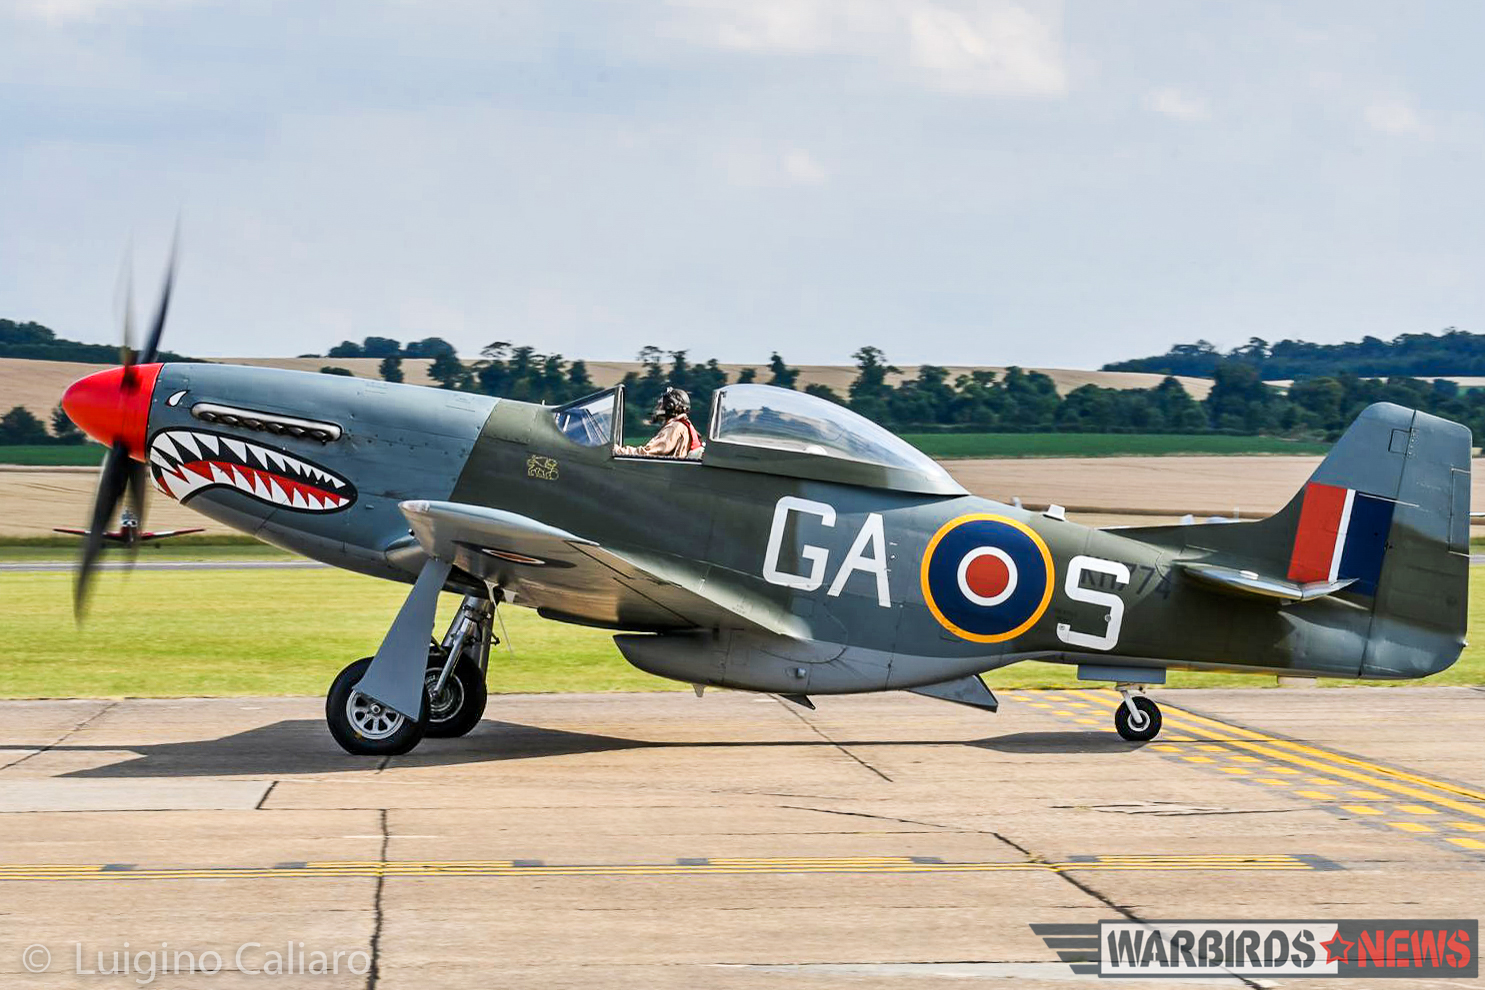 Shaun Patrick's magnificent P-51D 44-73877 (marked as an RAF Mustang IV KH774). (photo by Luigino Caliaro)